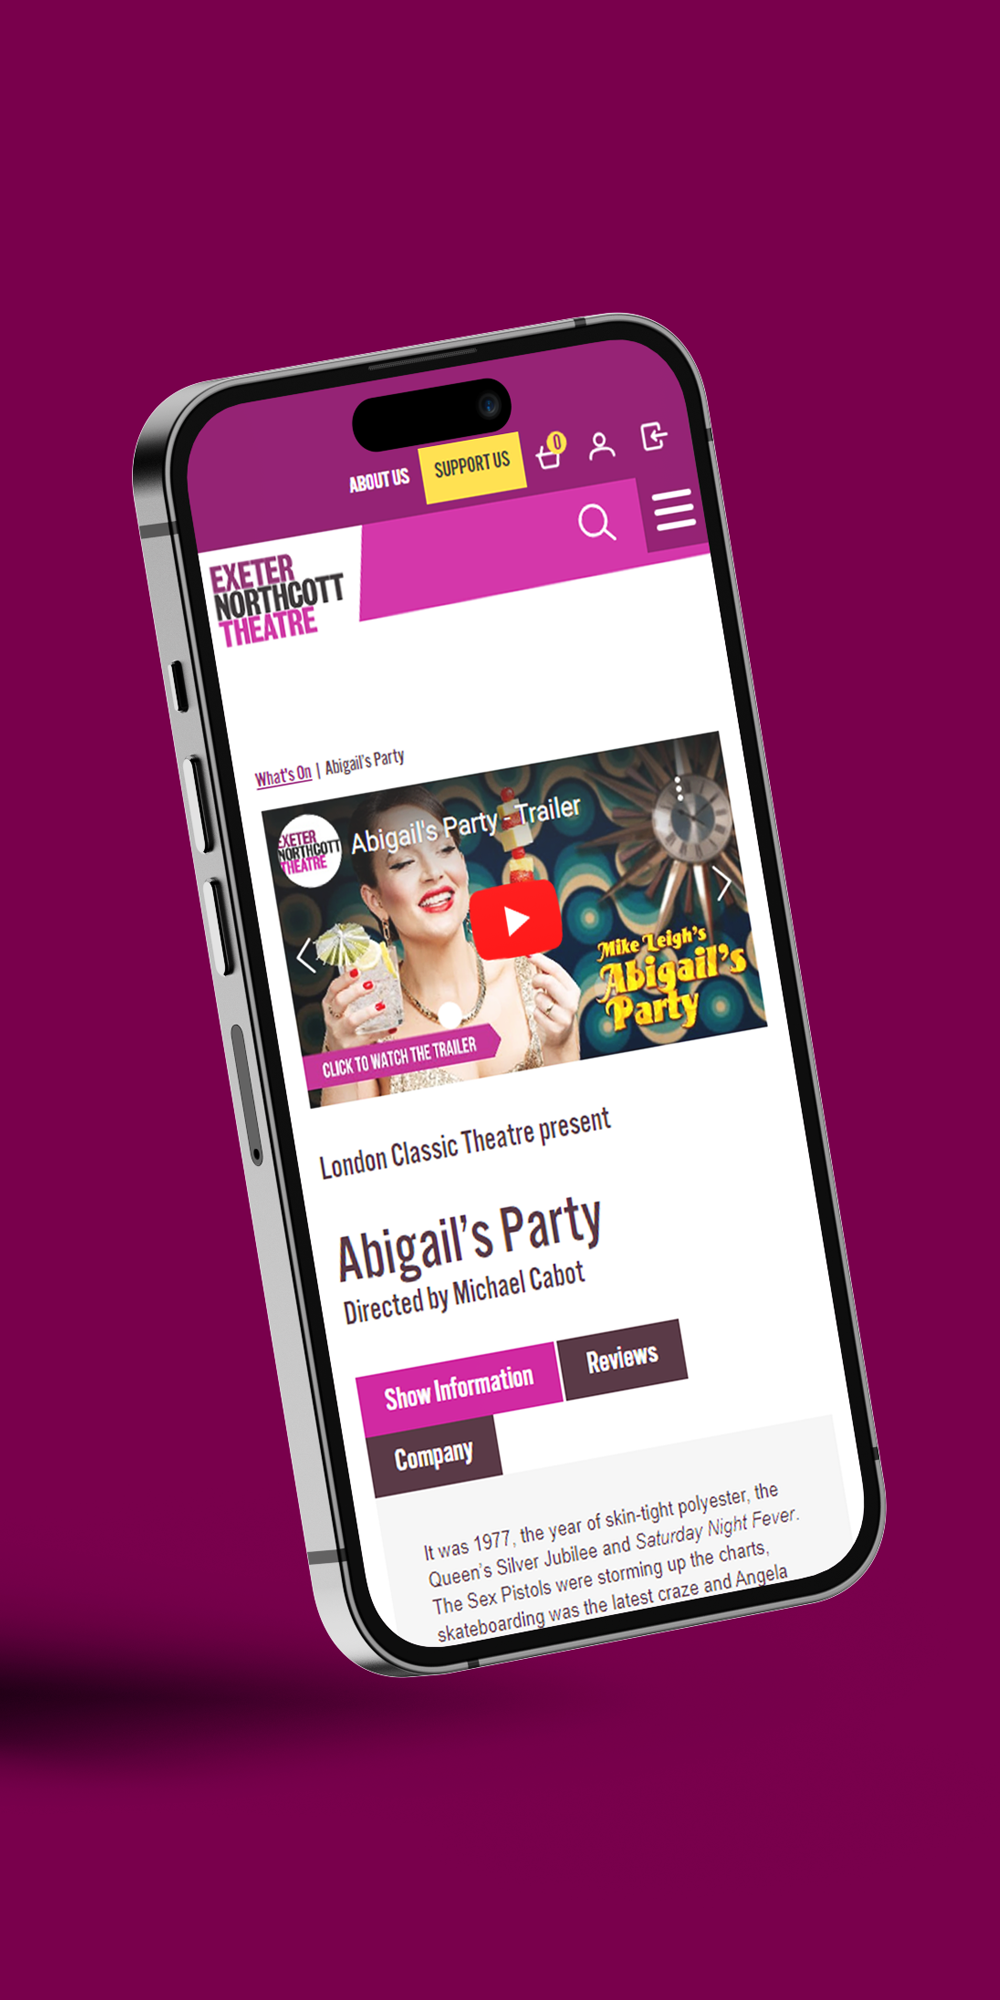 Exeter Northcott Theatre page for Abigail's Party shown on a phone screen